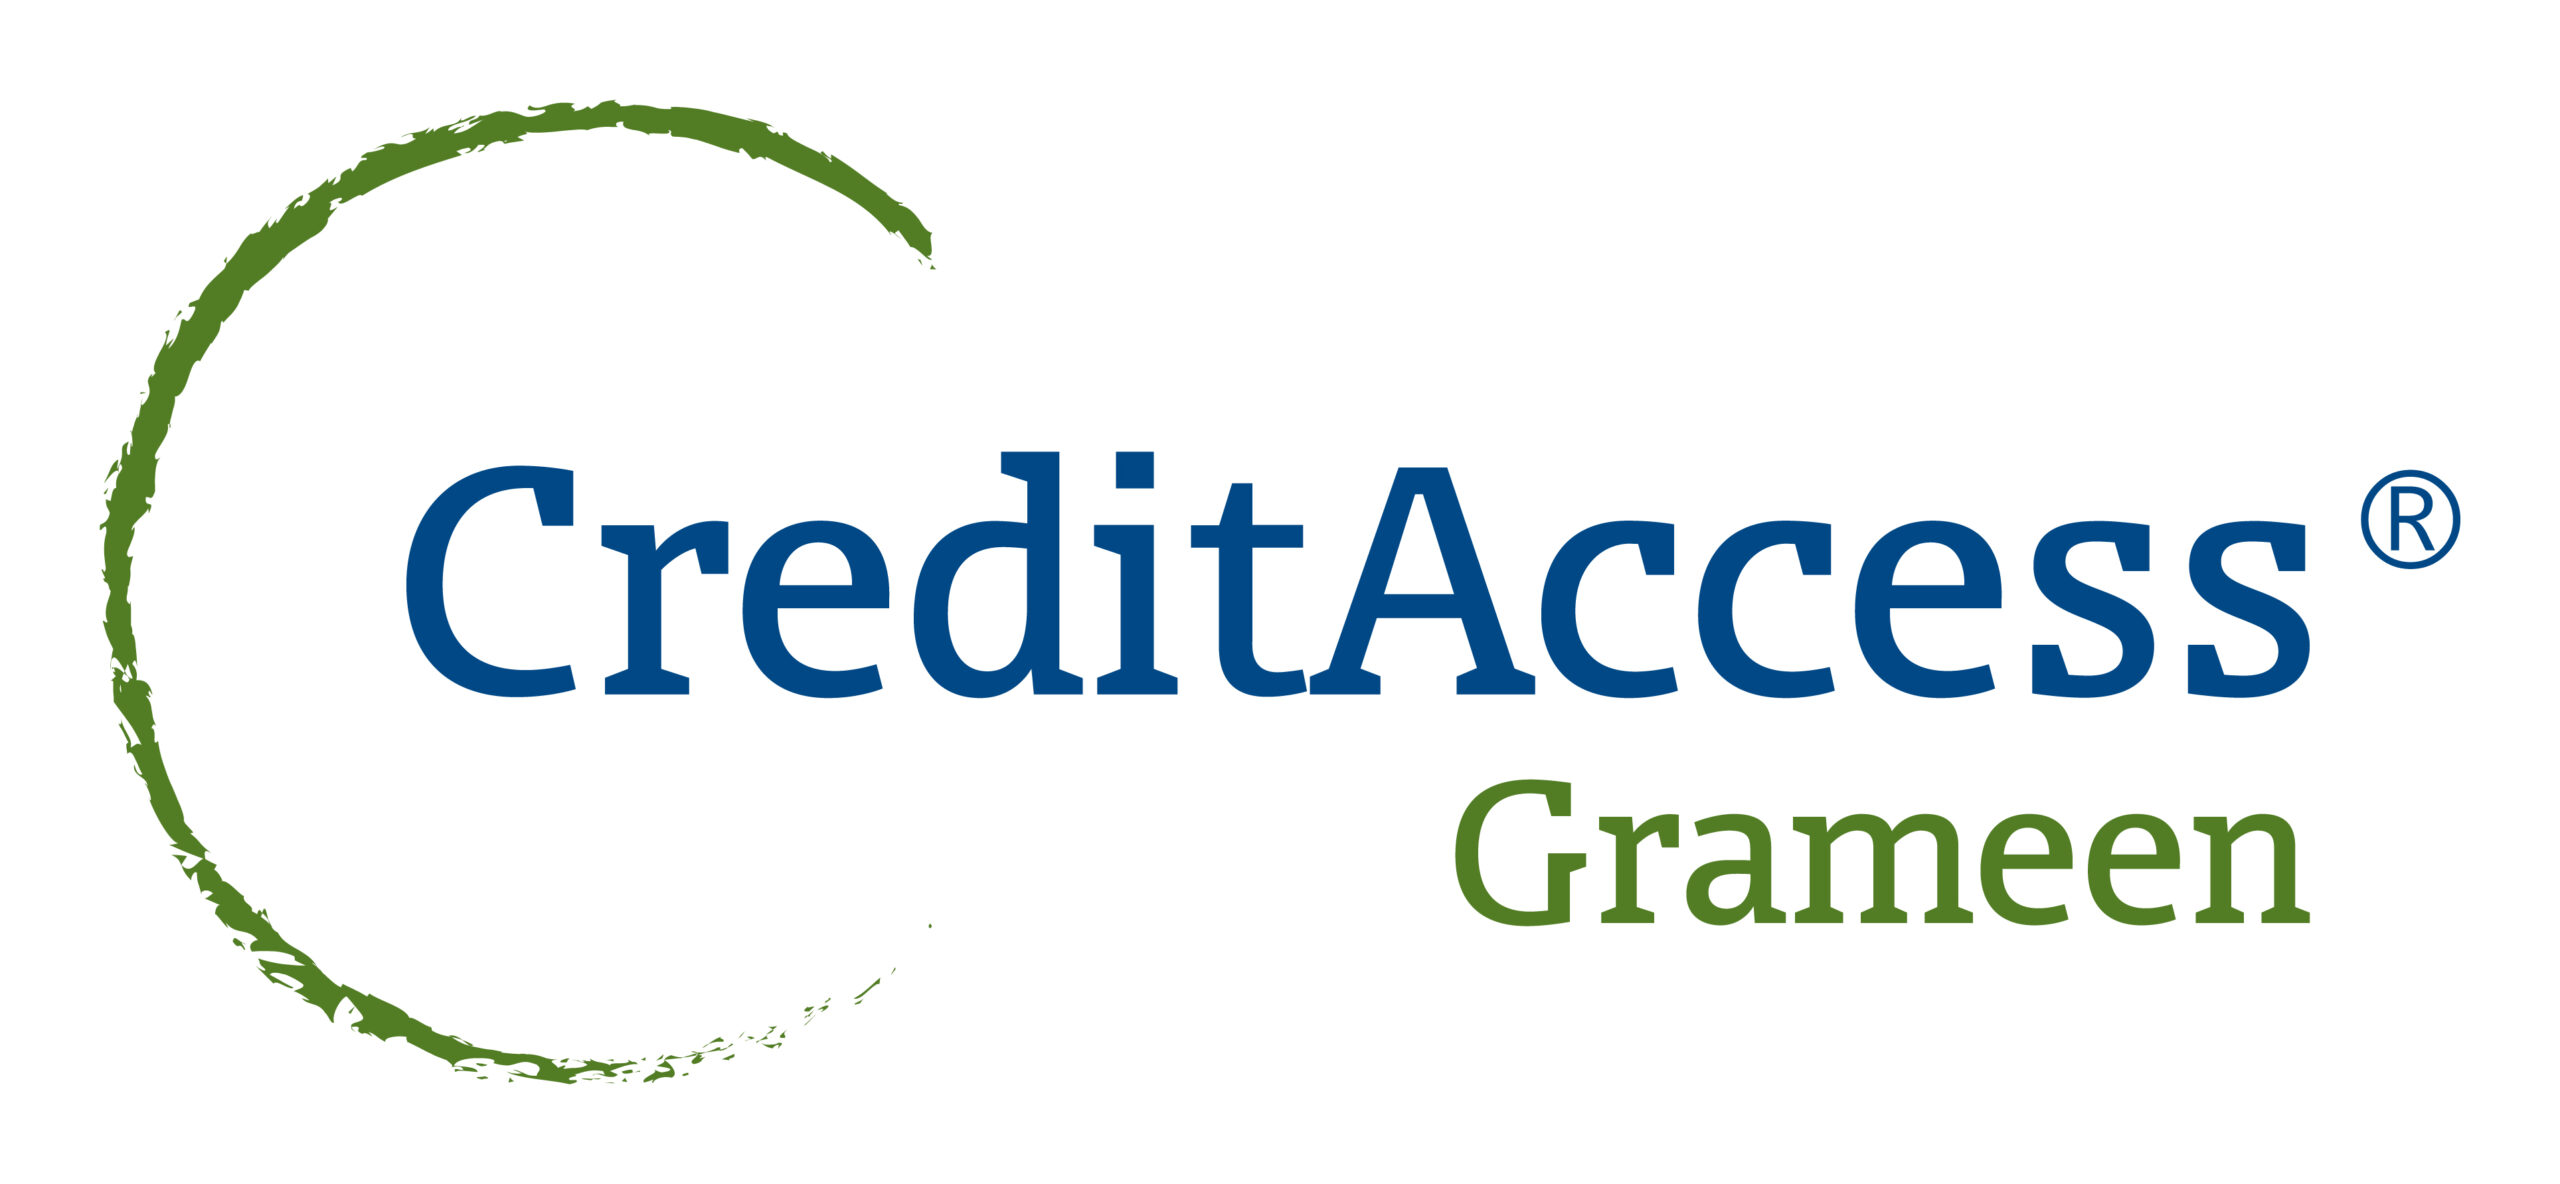 CreditAccess Grameen Limited